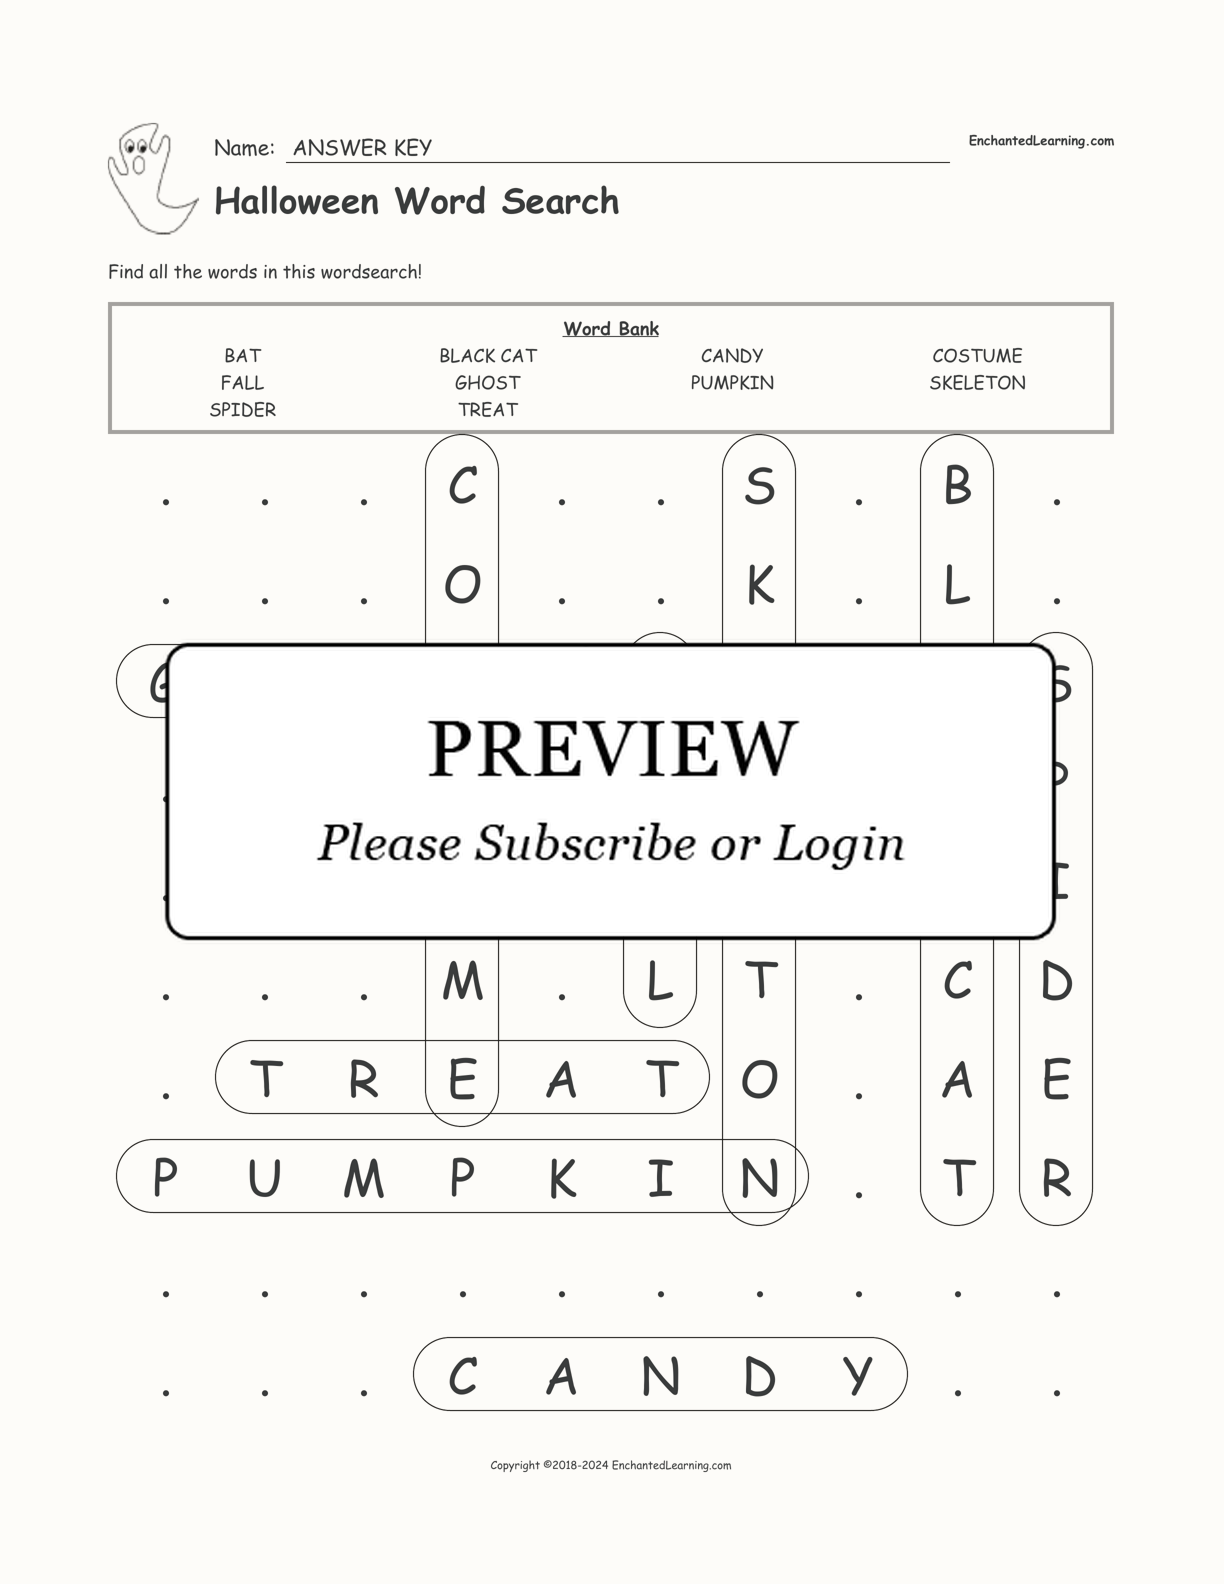 Halloween Word Search interactive worksheet page 2